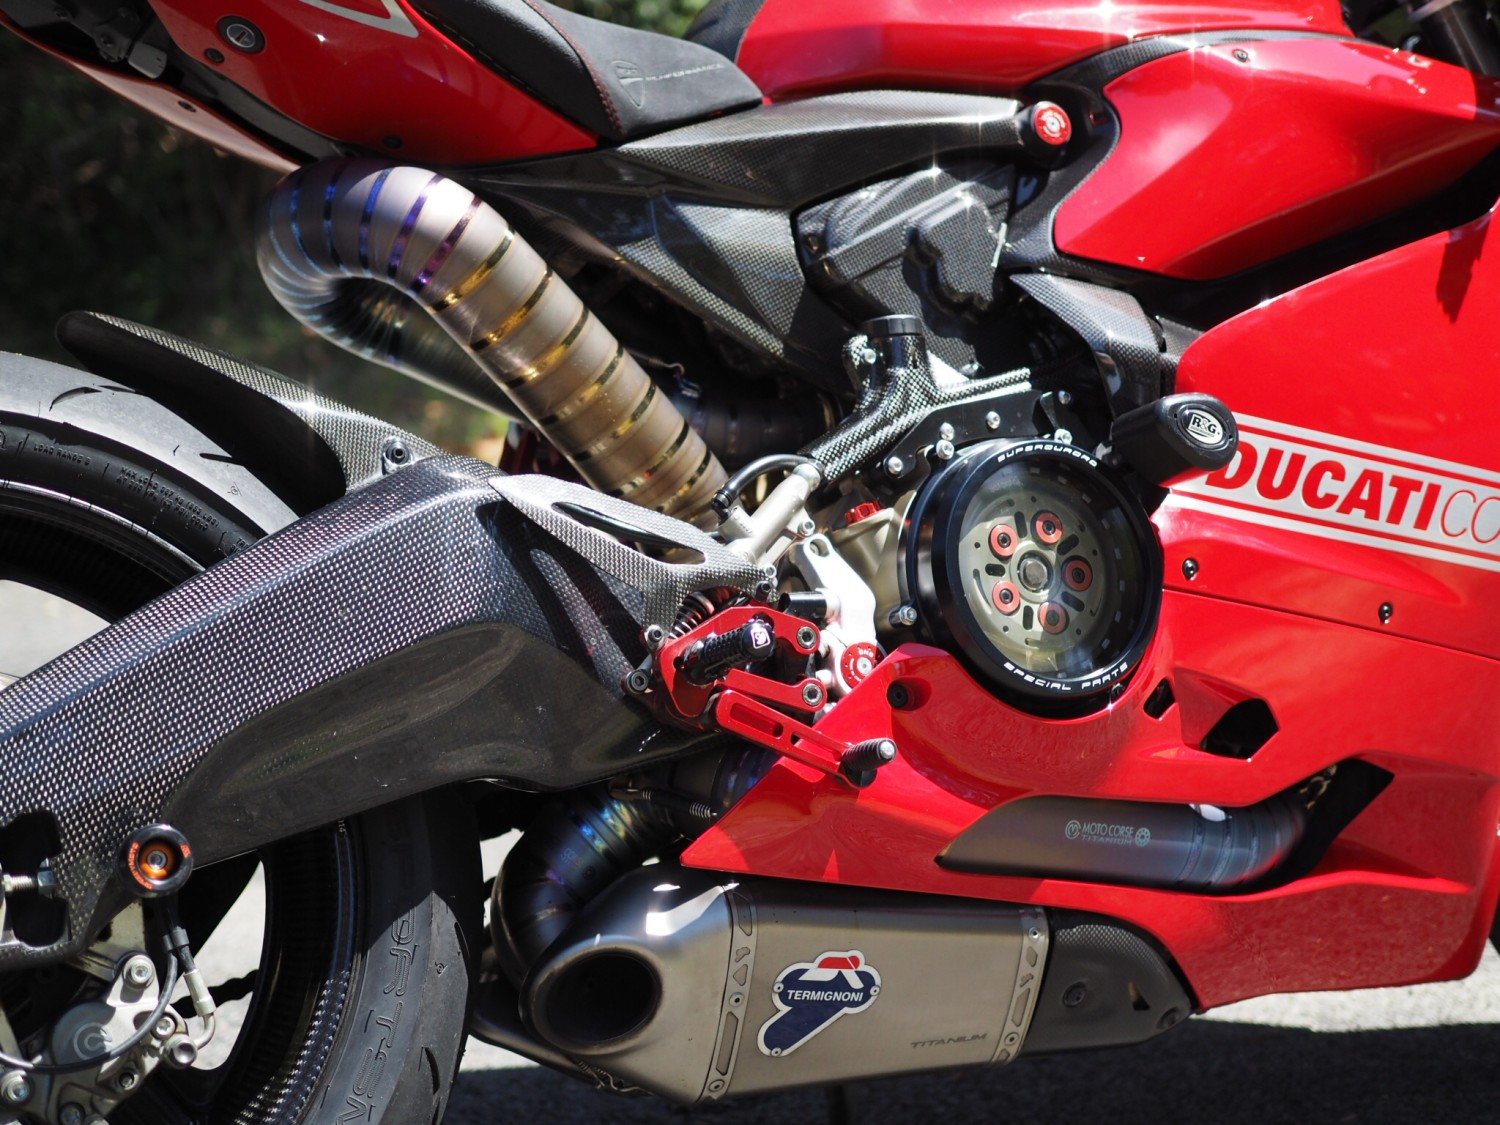 2014 Ducati 899 Panigale - Ducrider - Shannons Club